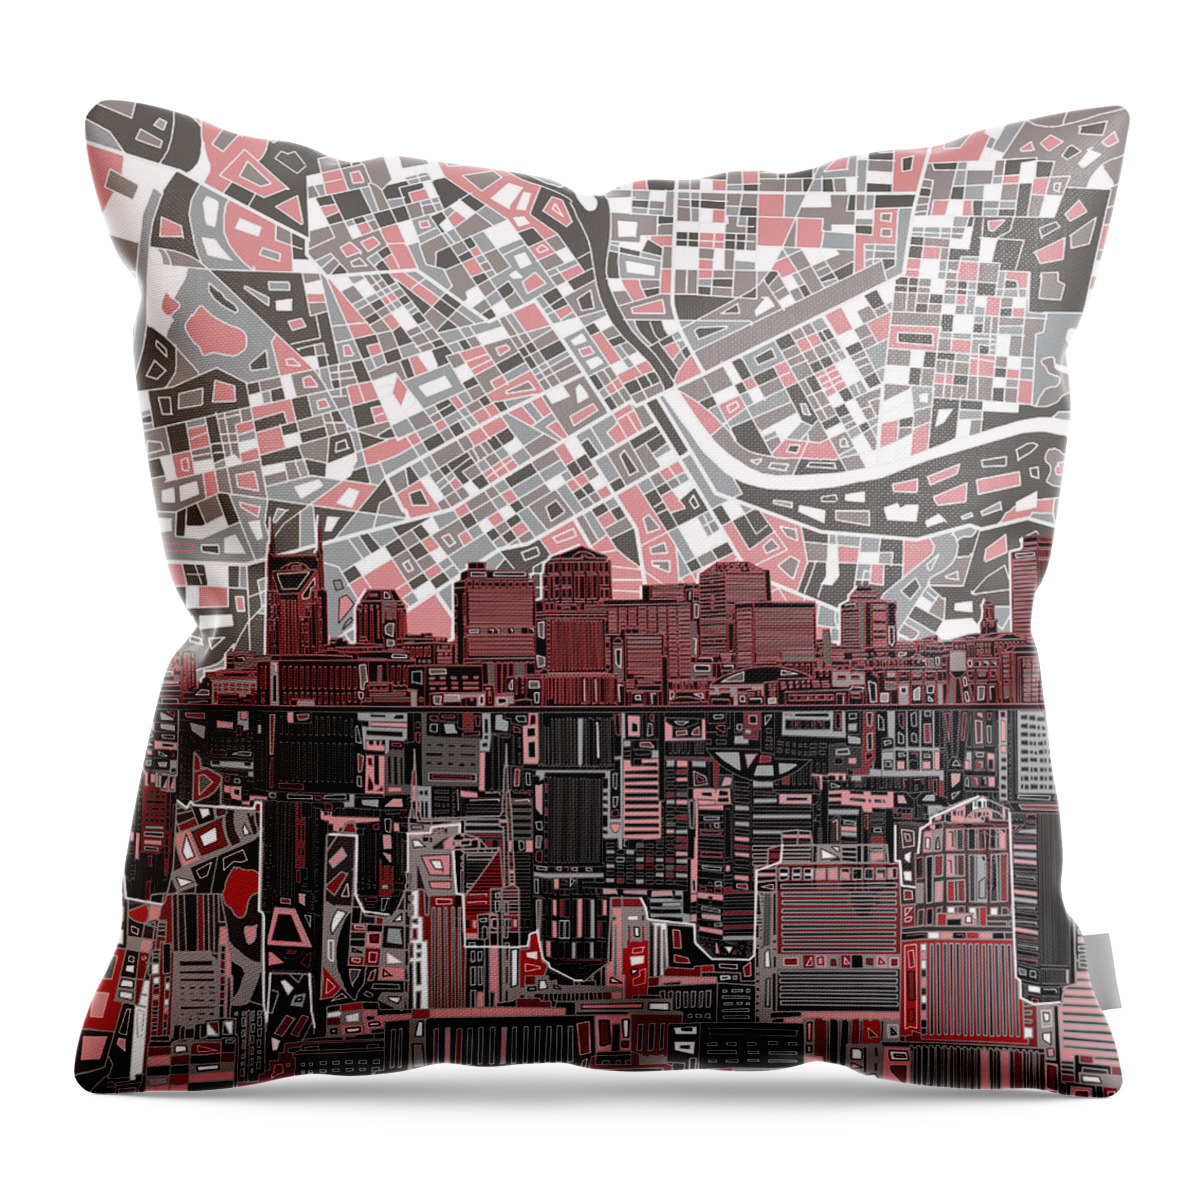 Nashville Throw Pillow featuring the painting Nashville Skyline Abstract 3 by Bekim M